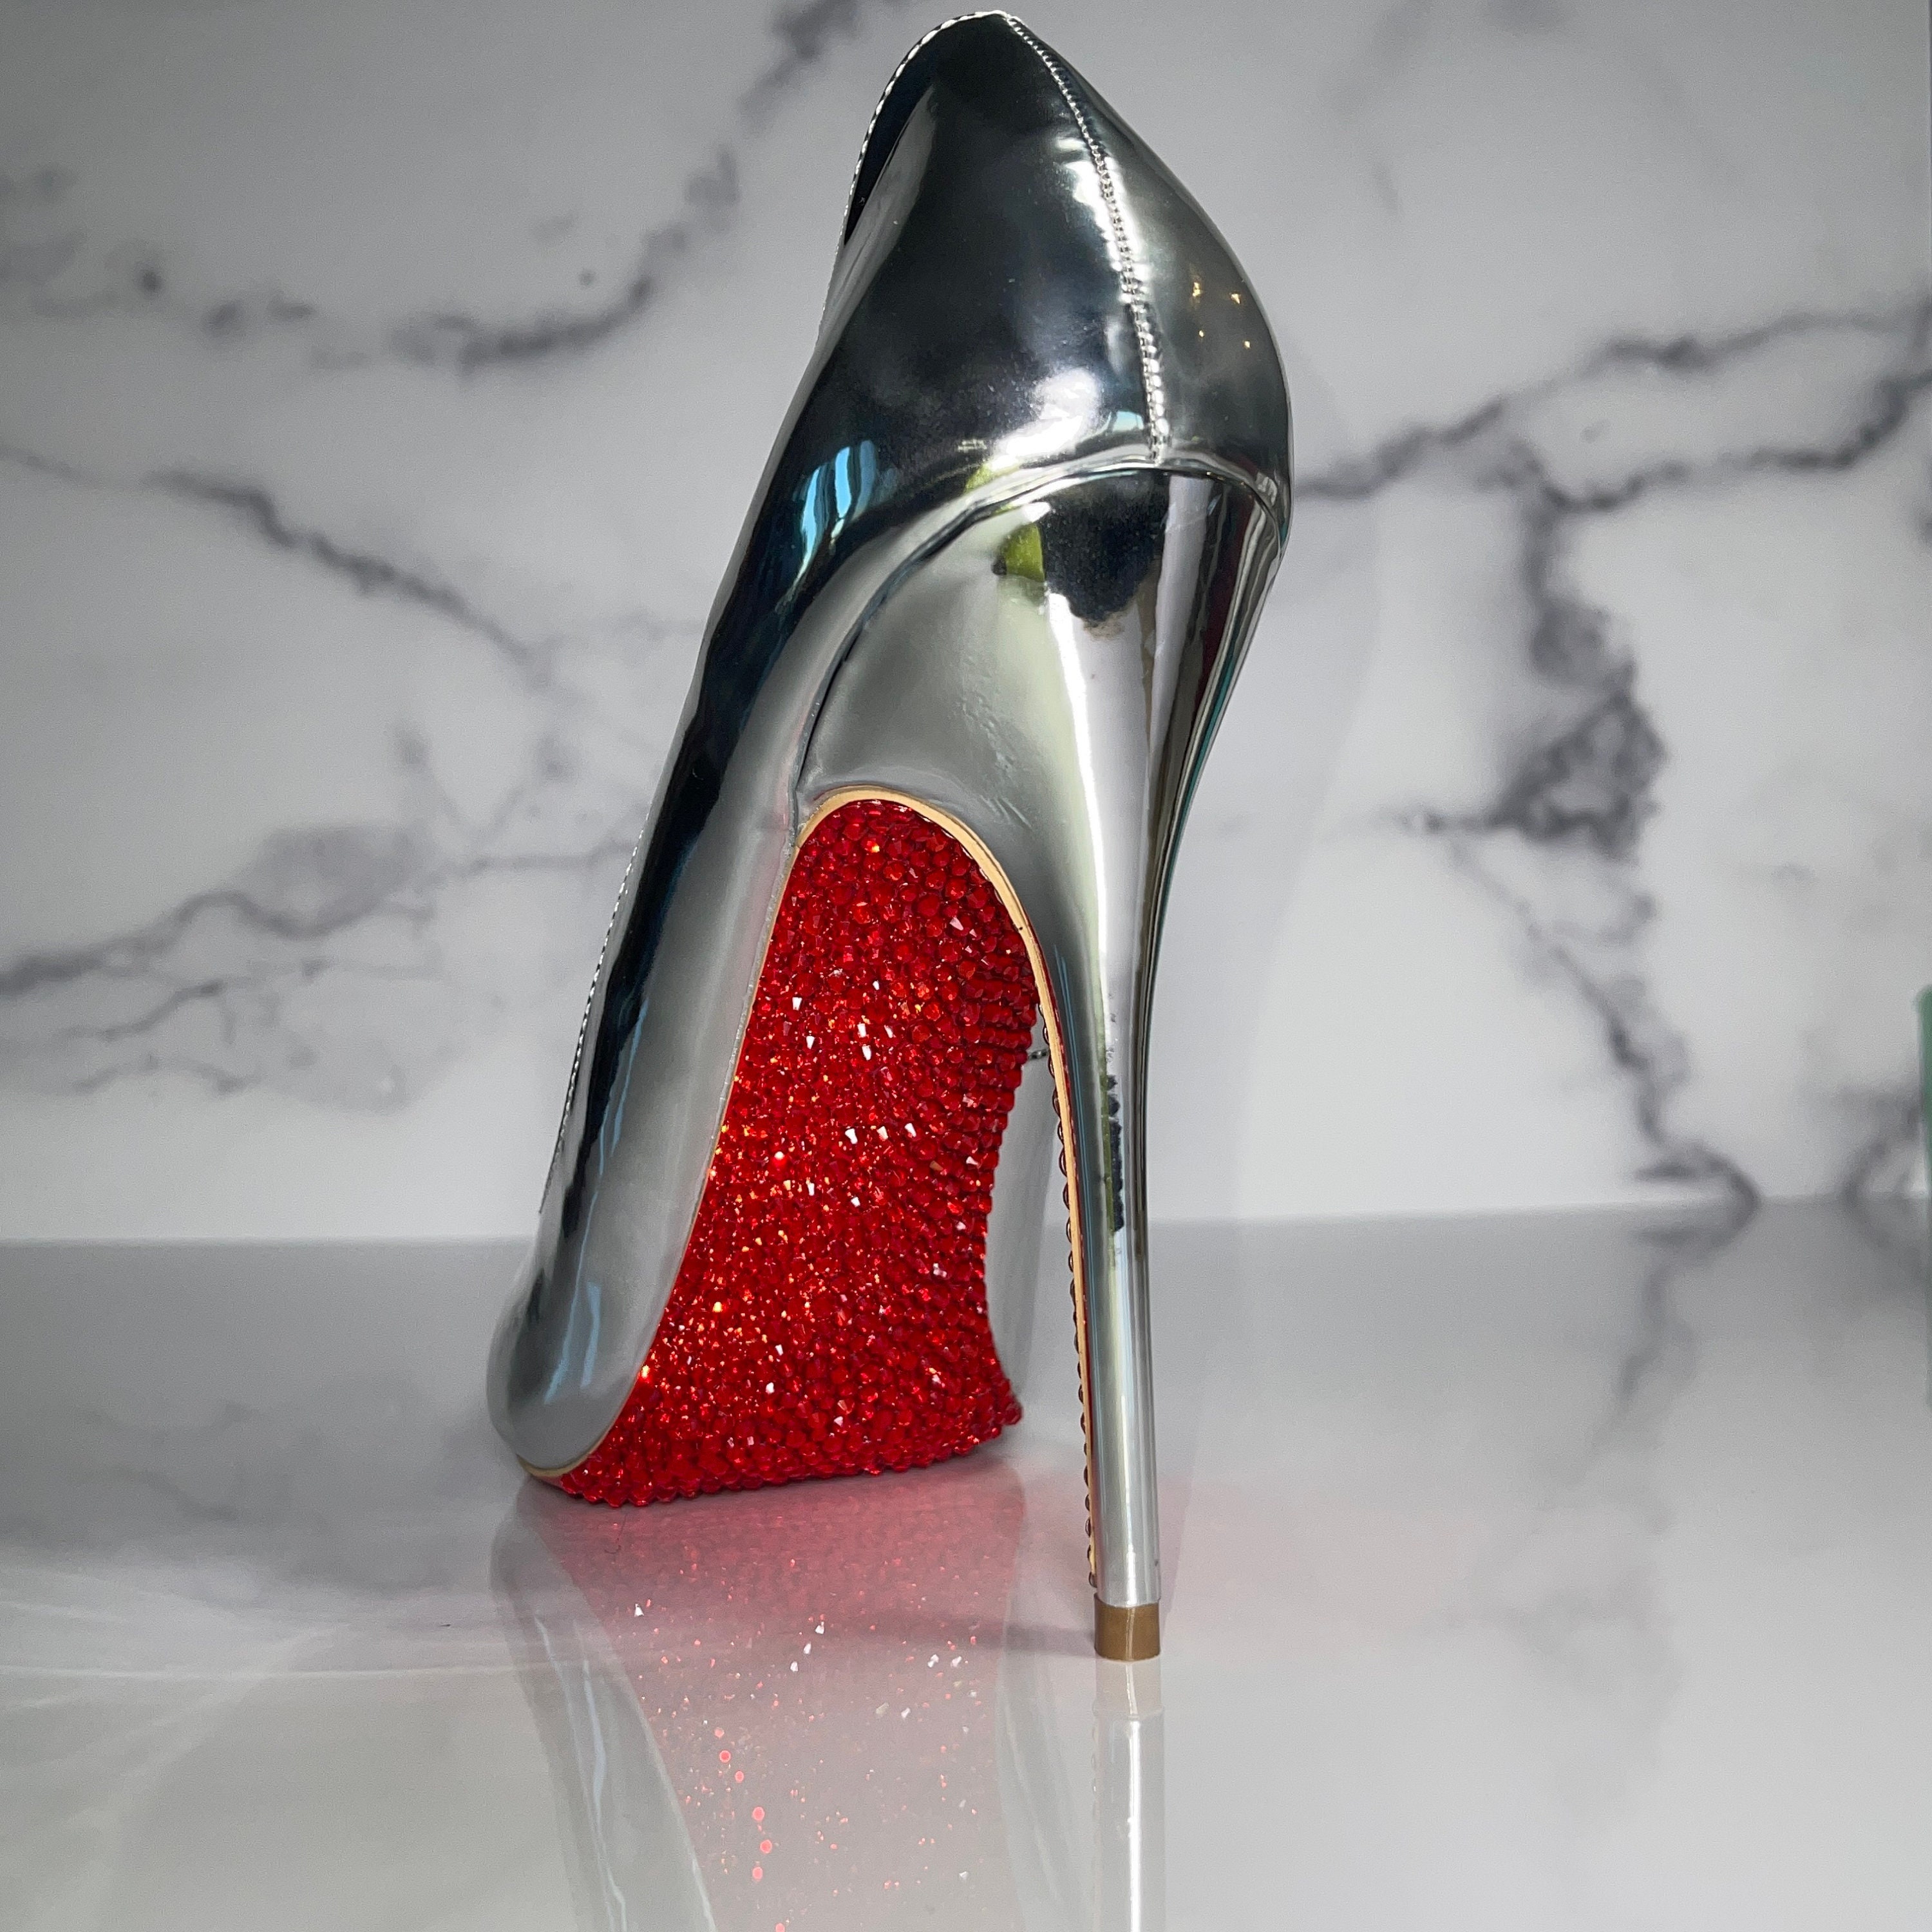 Fashion Black Evening Party Red Sole Pumps 2023 Leather 12 cm Stiletto Heels  Pointed Toe Pumps High Heels